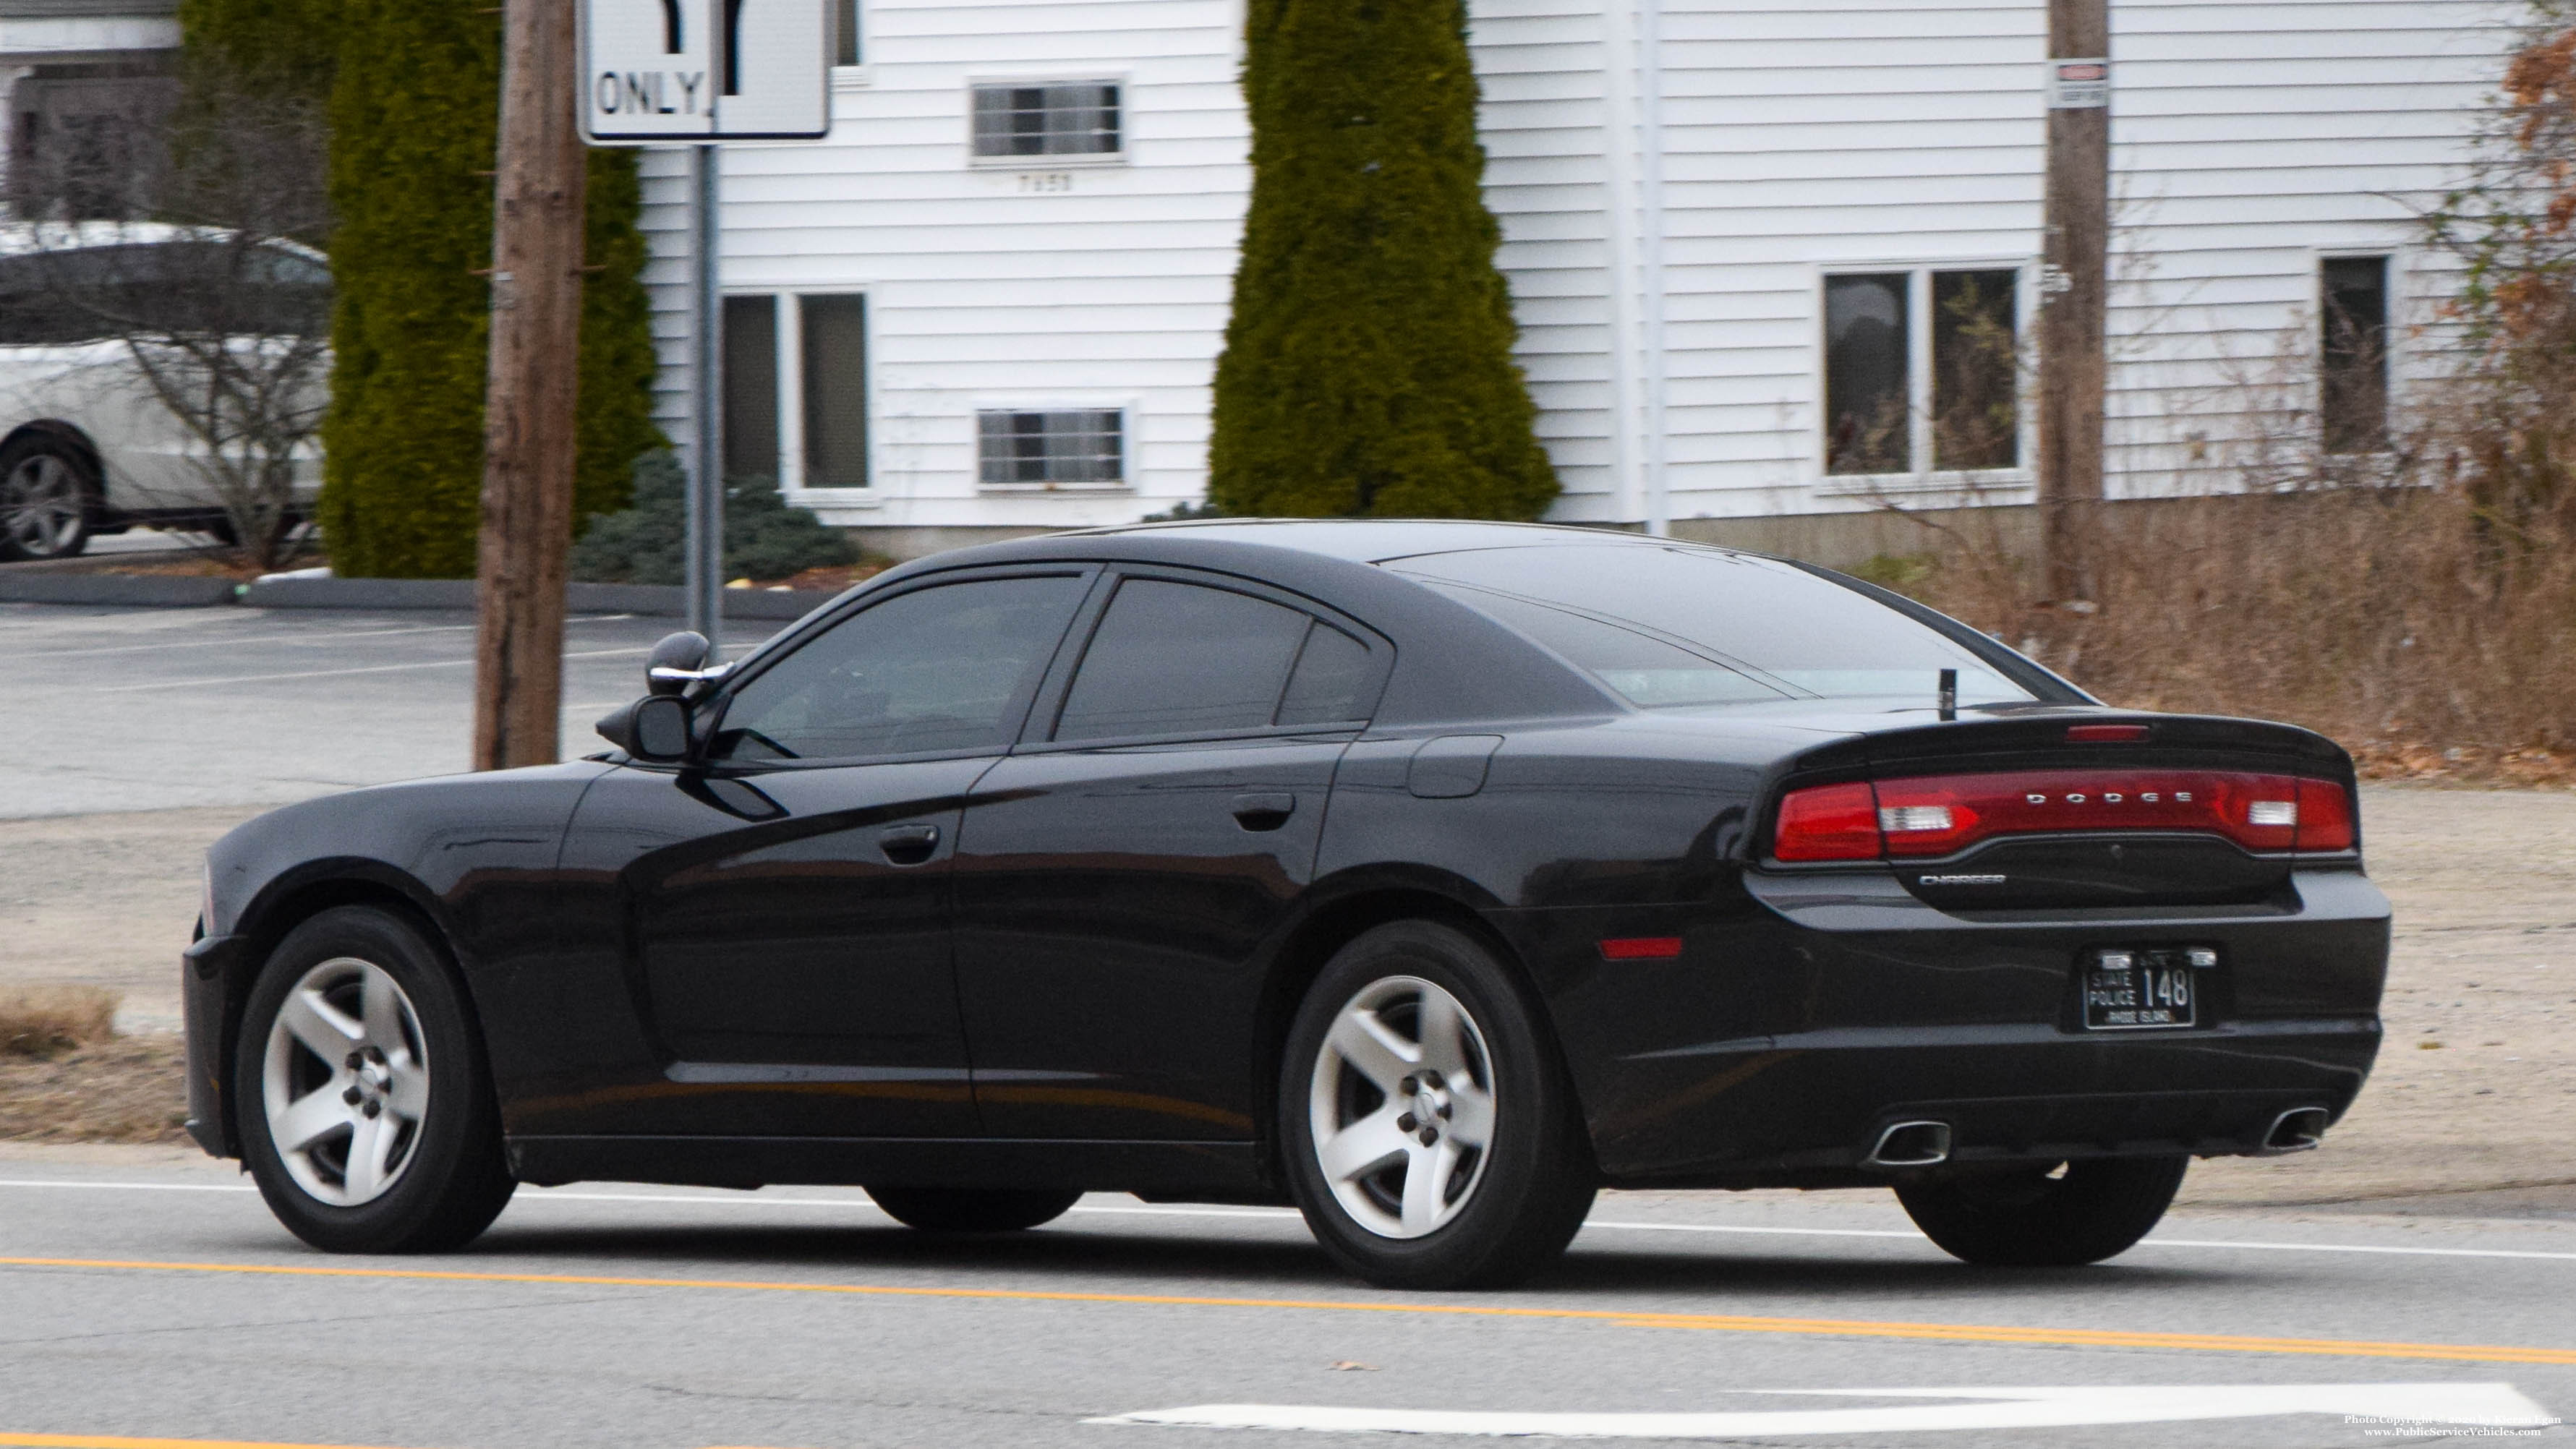 A photo  of Rhode Island State Police
            Cruiser 148, a 2013 Dodge Charger             taken by Kieran Egan